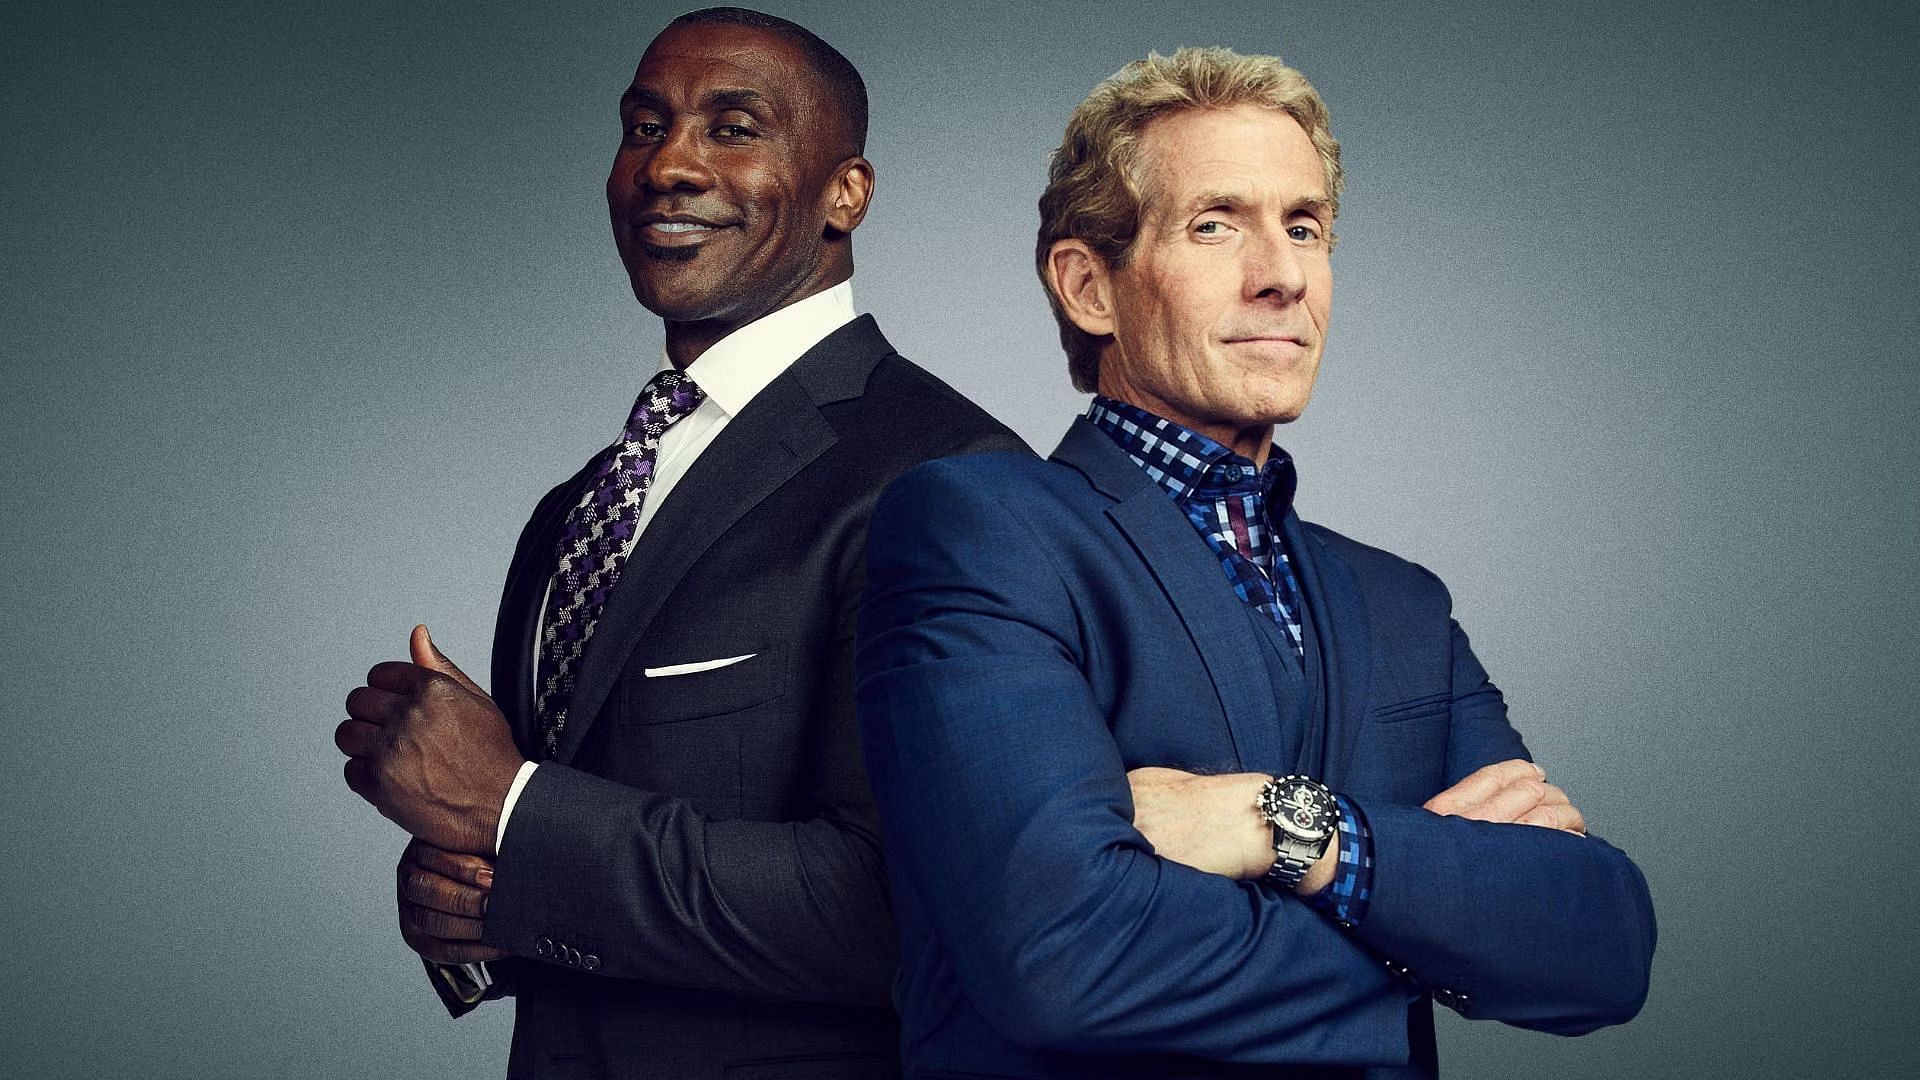 Shannon Sharpe and Skip Bayless were the main hosts of FS1